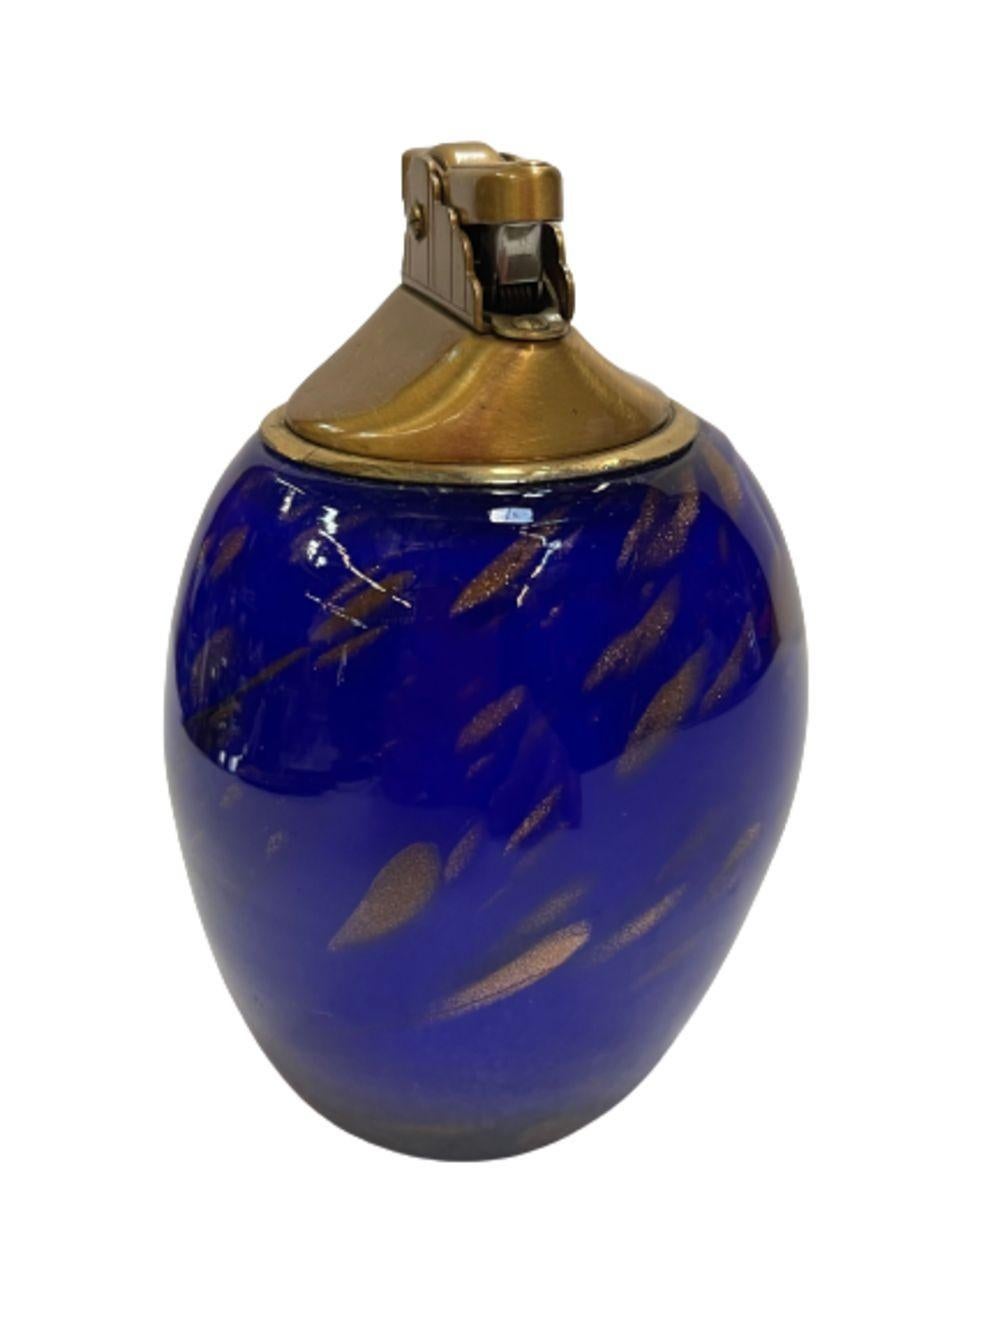 Original blue murano glass with gold leaf table lighter. This lighter features hand-crafted and polished dark ocean blue glass with gold leaf accents throughout, the lighter mechanism is cast in brass.
Made in Italy, circa 1960.